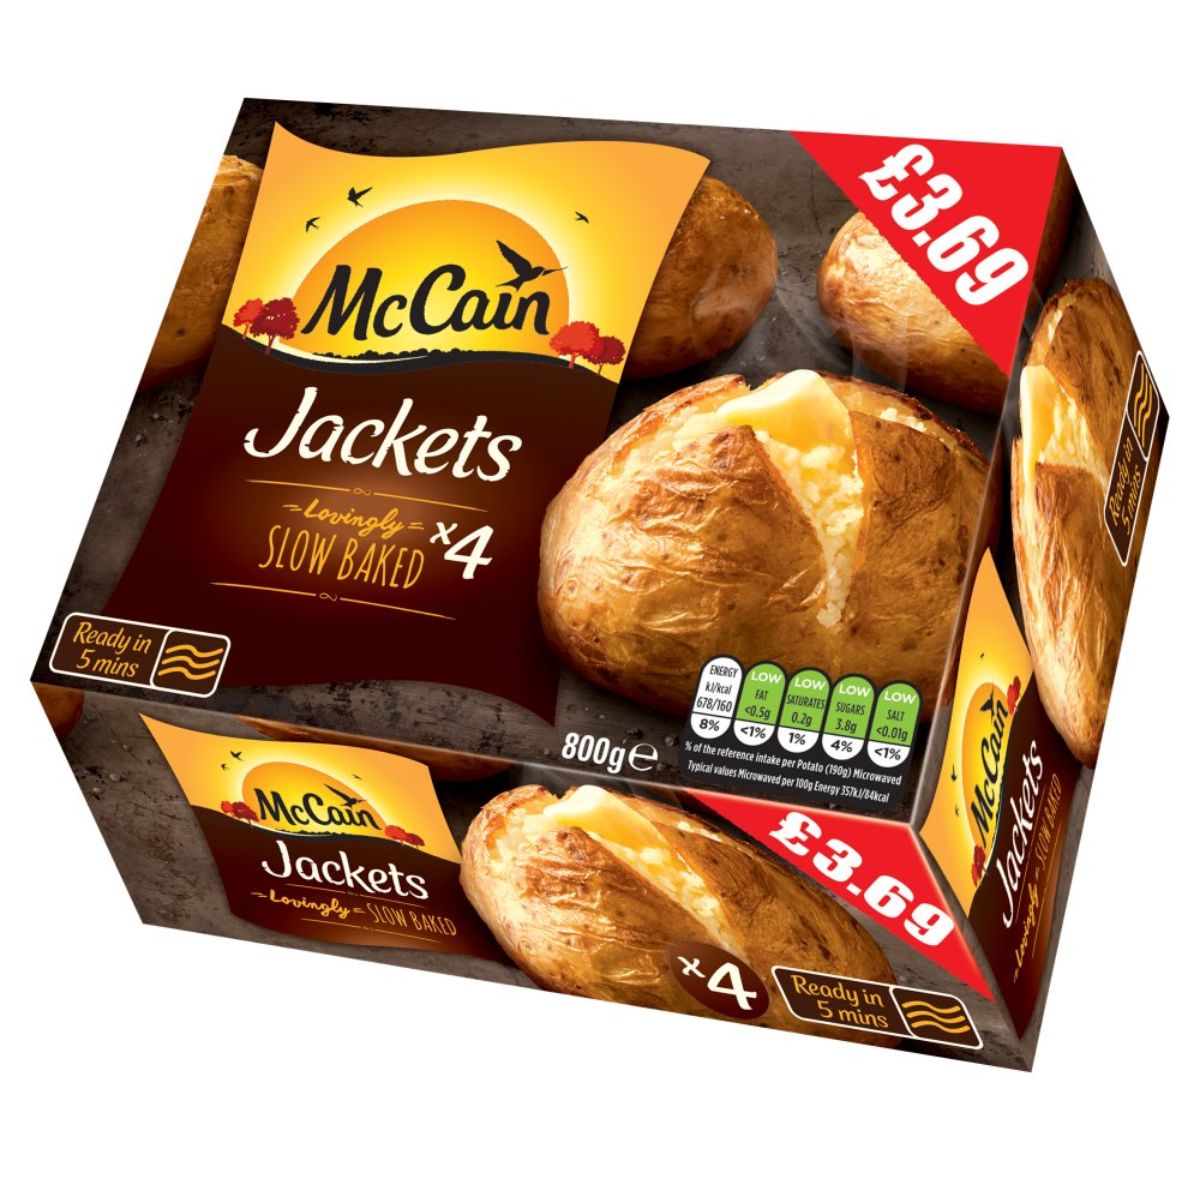 A box of McCain - 4 Lovingly Slow Baked Jackets - 800g in a white box.